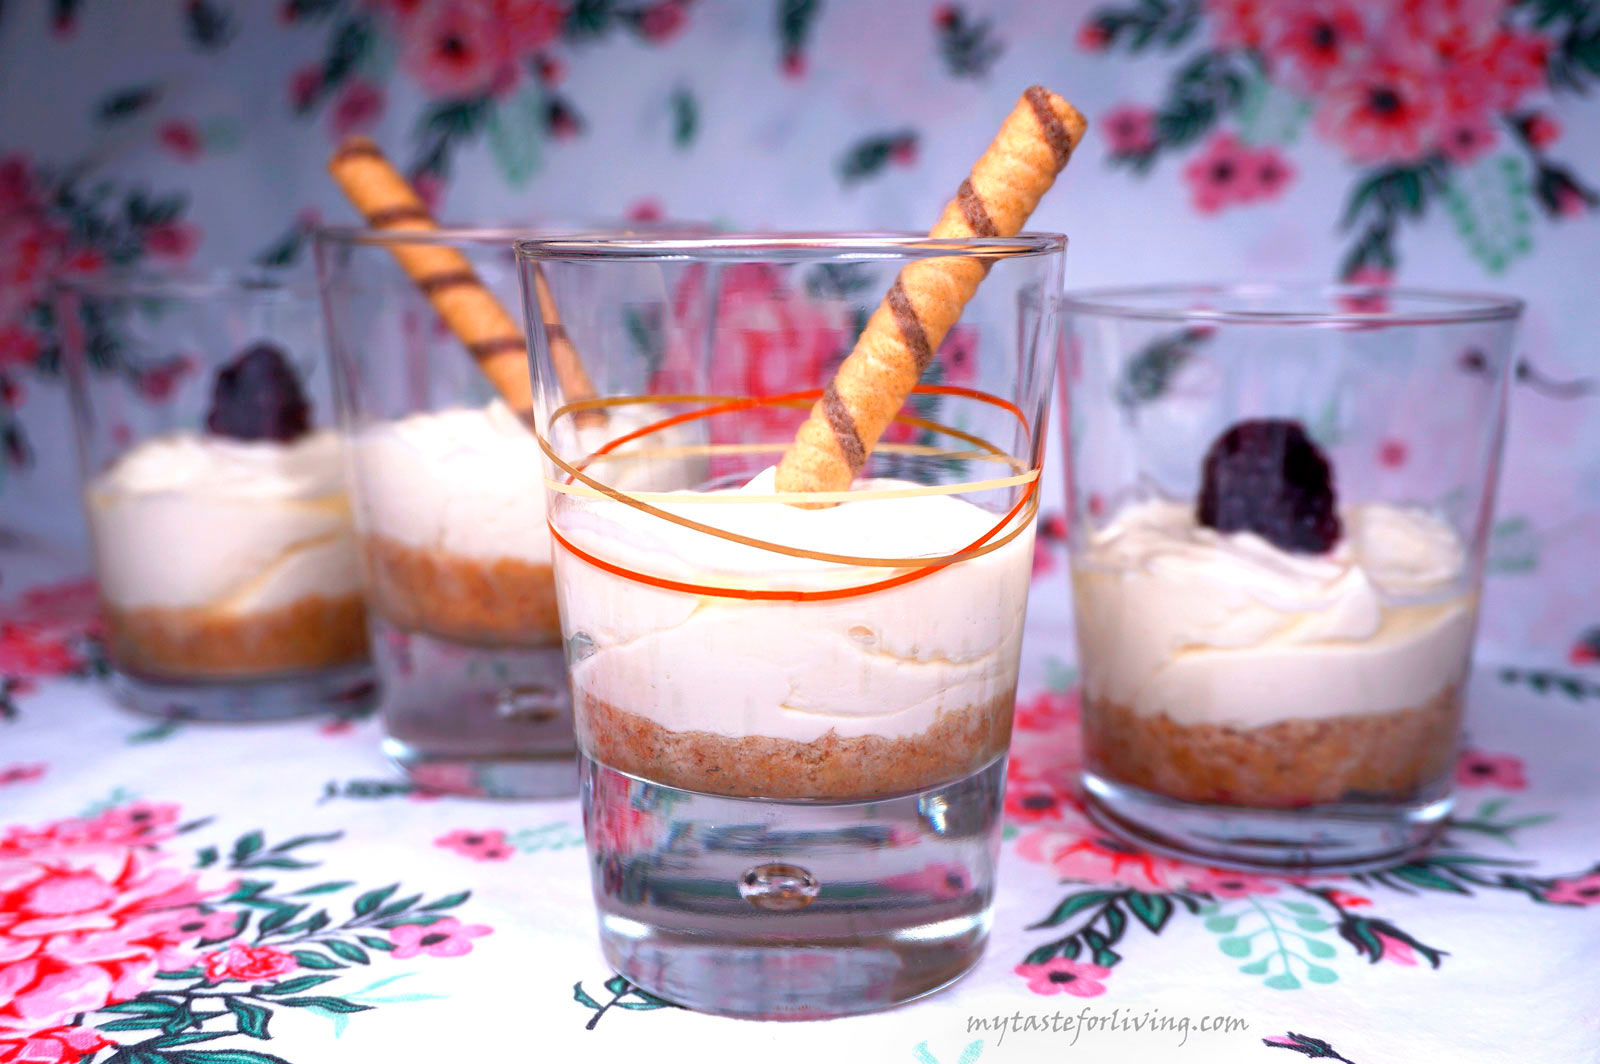 Quick mascarpone cheesecake in a glass, which is very easy to prepare, with few ingredients, and the result is extremely tasty! You need biscuits to your taste and choice, coconut oil or butter, mascarpone, yogurt, vanilla, maple syrup or honey. 